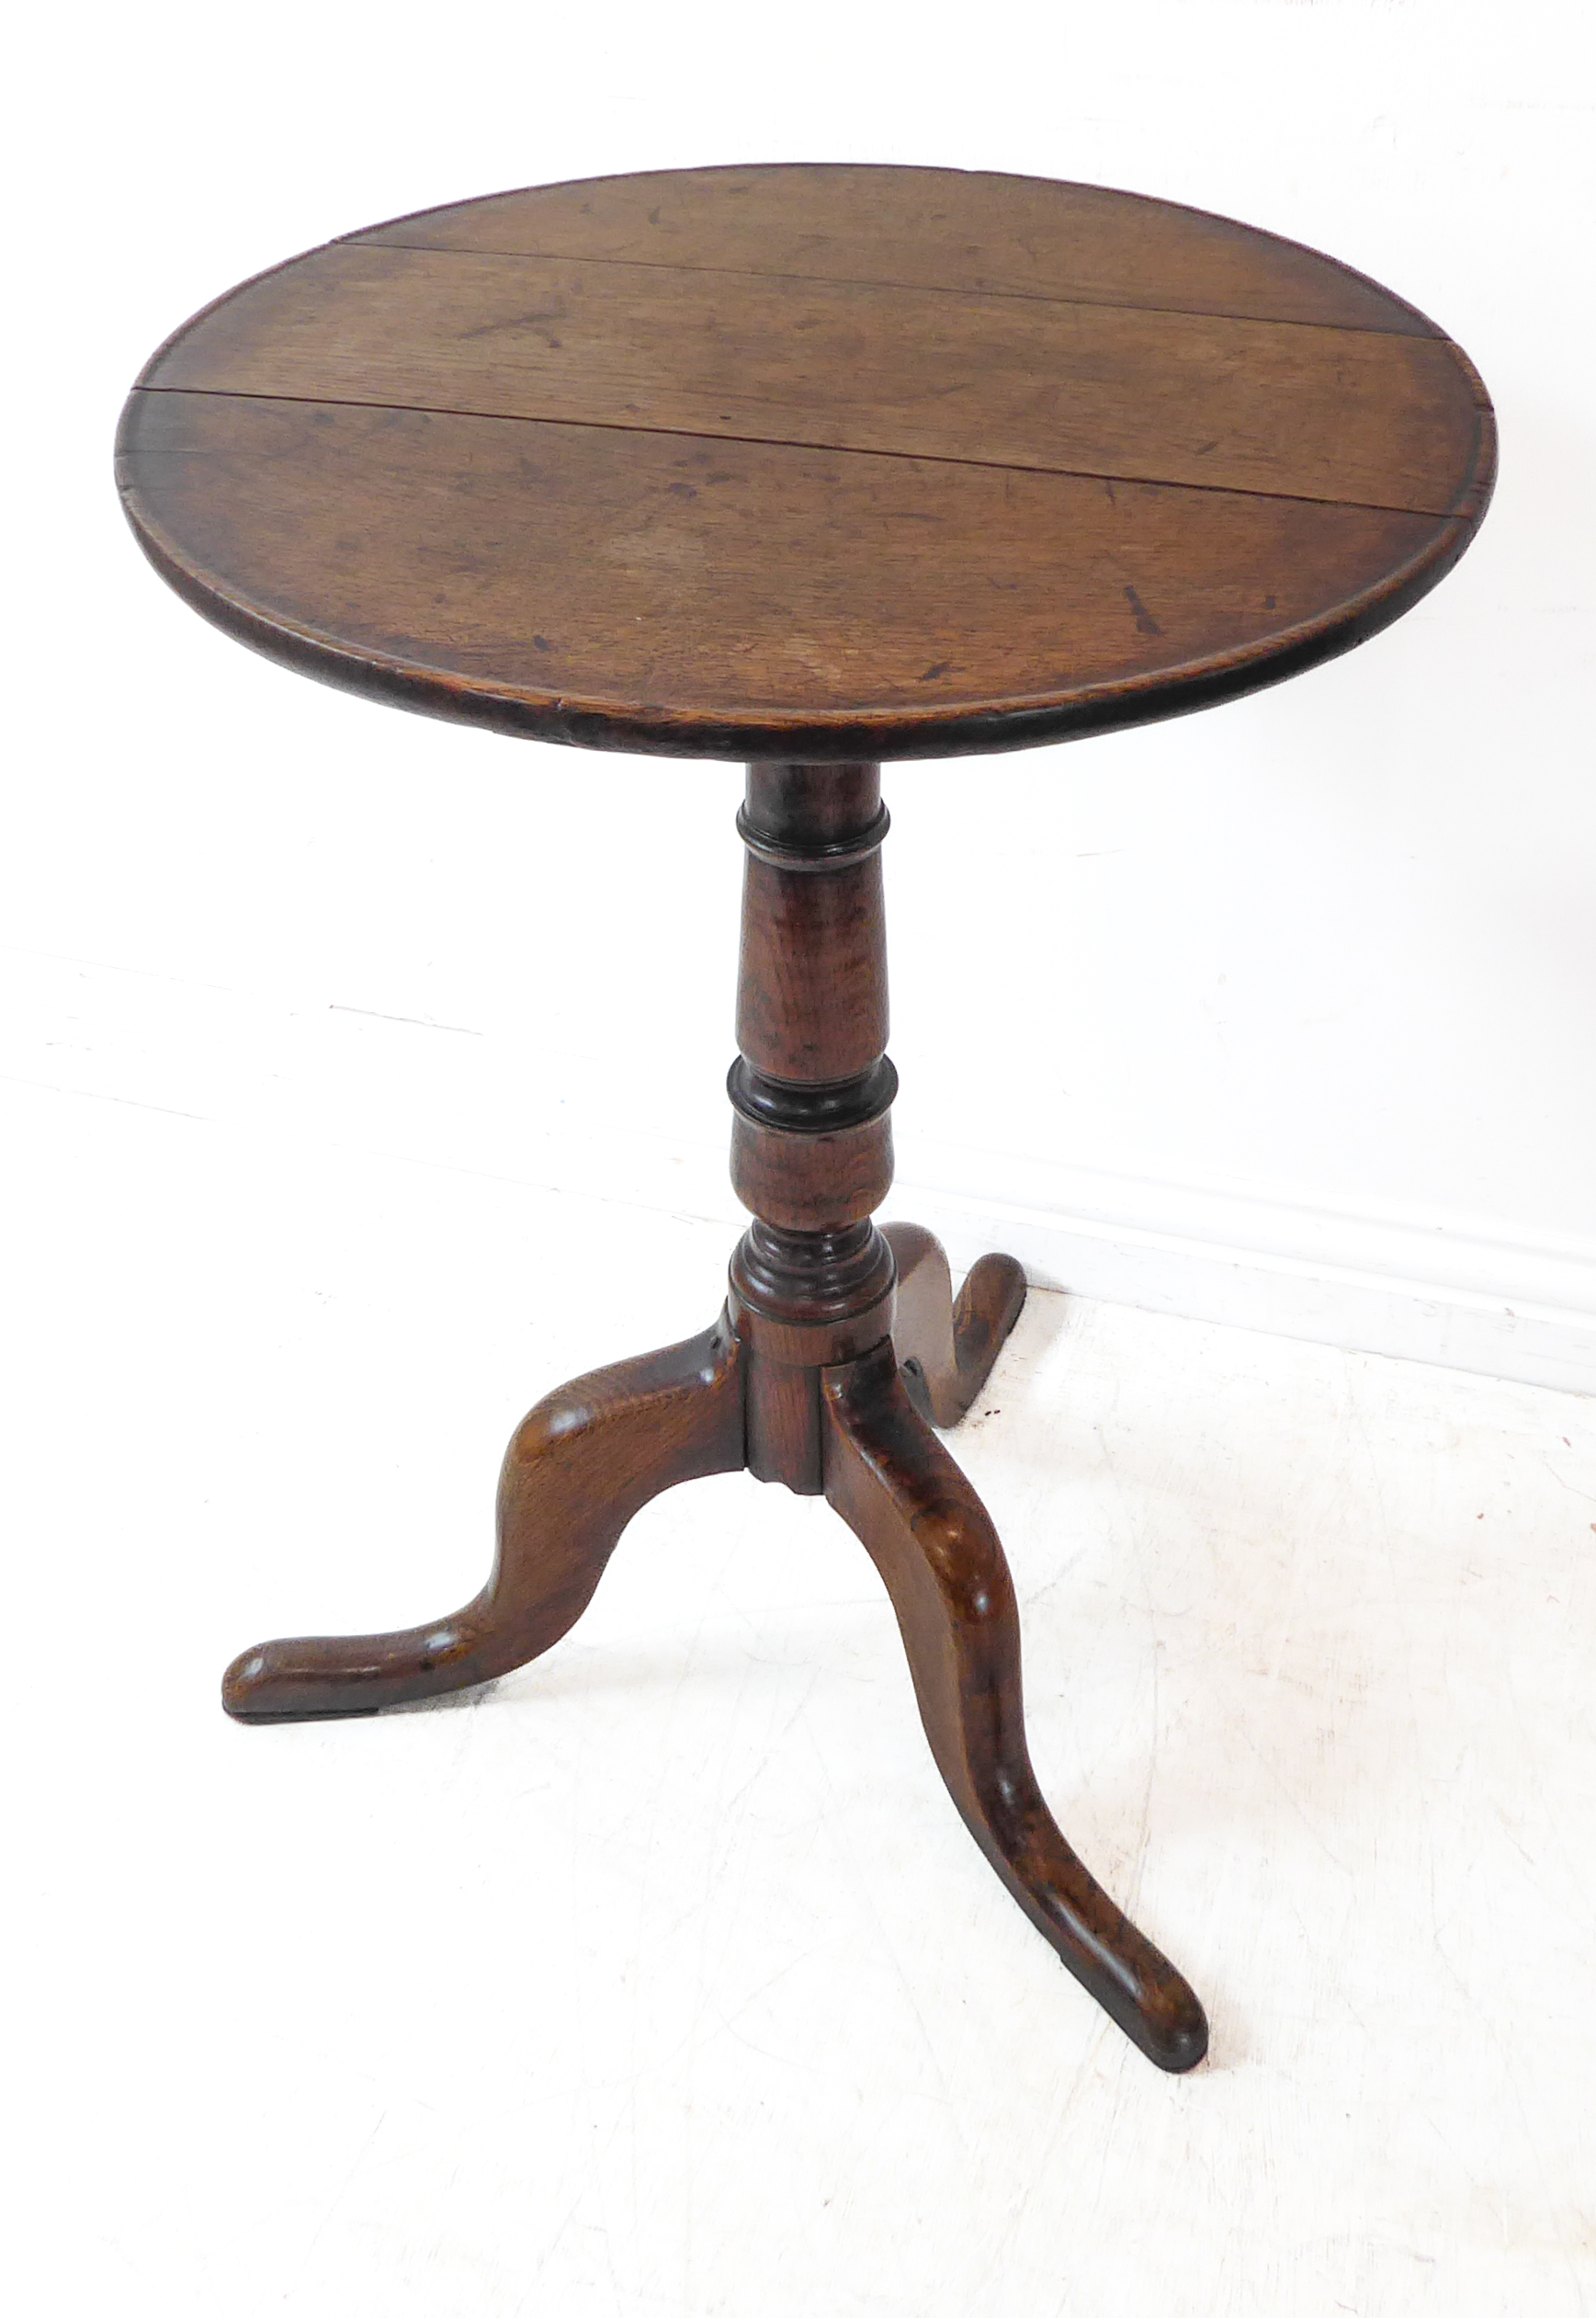 A George III period 18th century circular topped oak occasional table, tuned stem and on tripod base